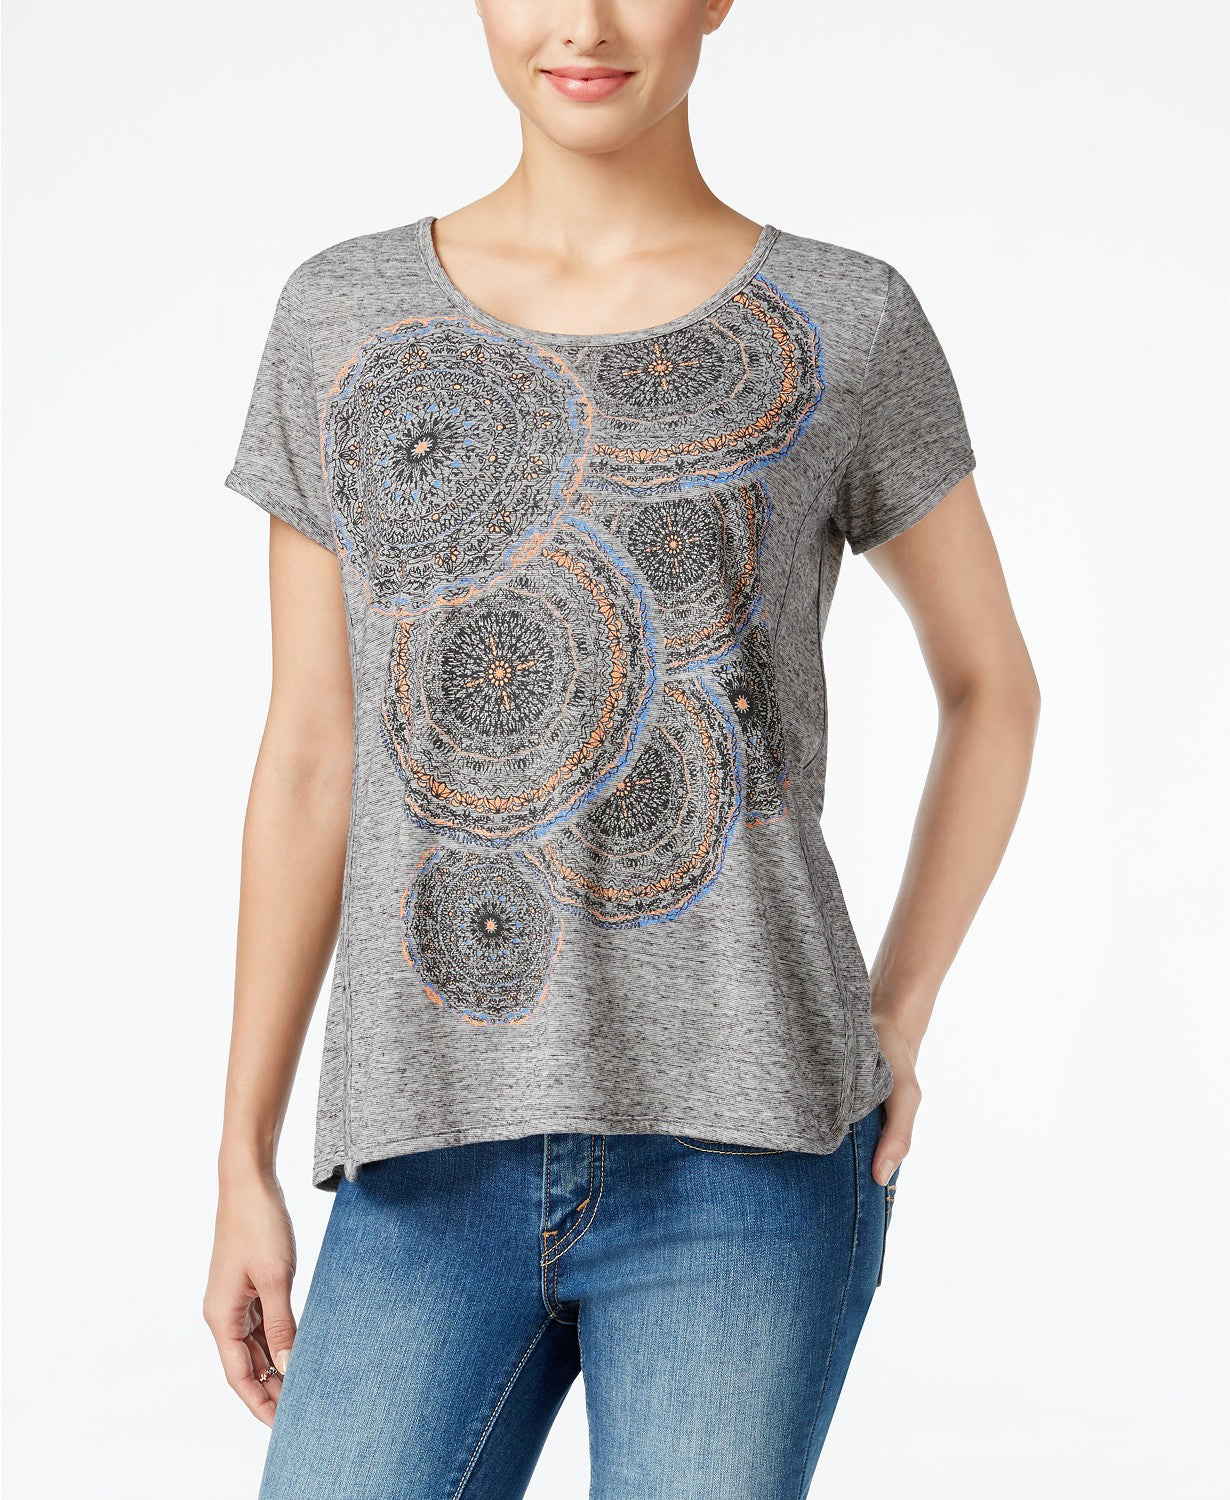 Style Co Petite Graphic-Print T-Shirt Grey Combo PXS